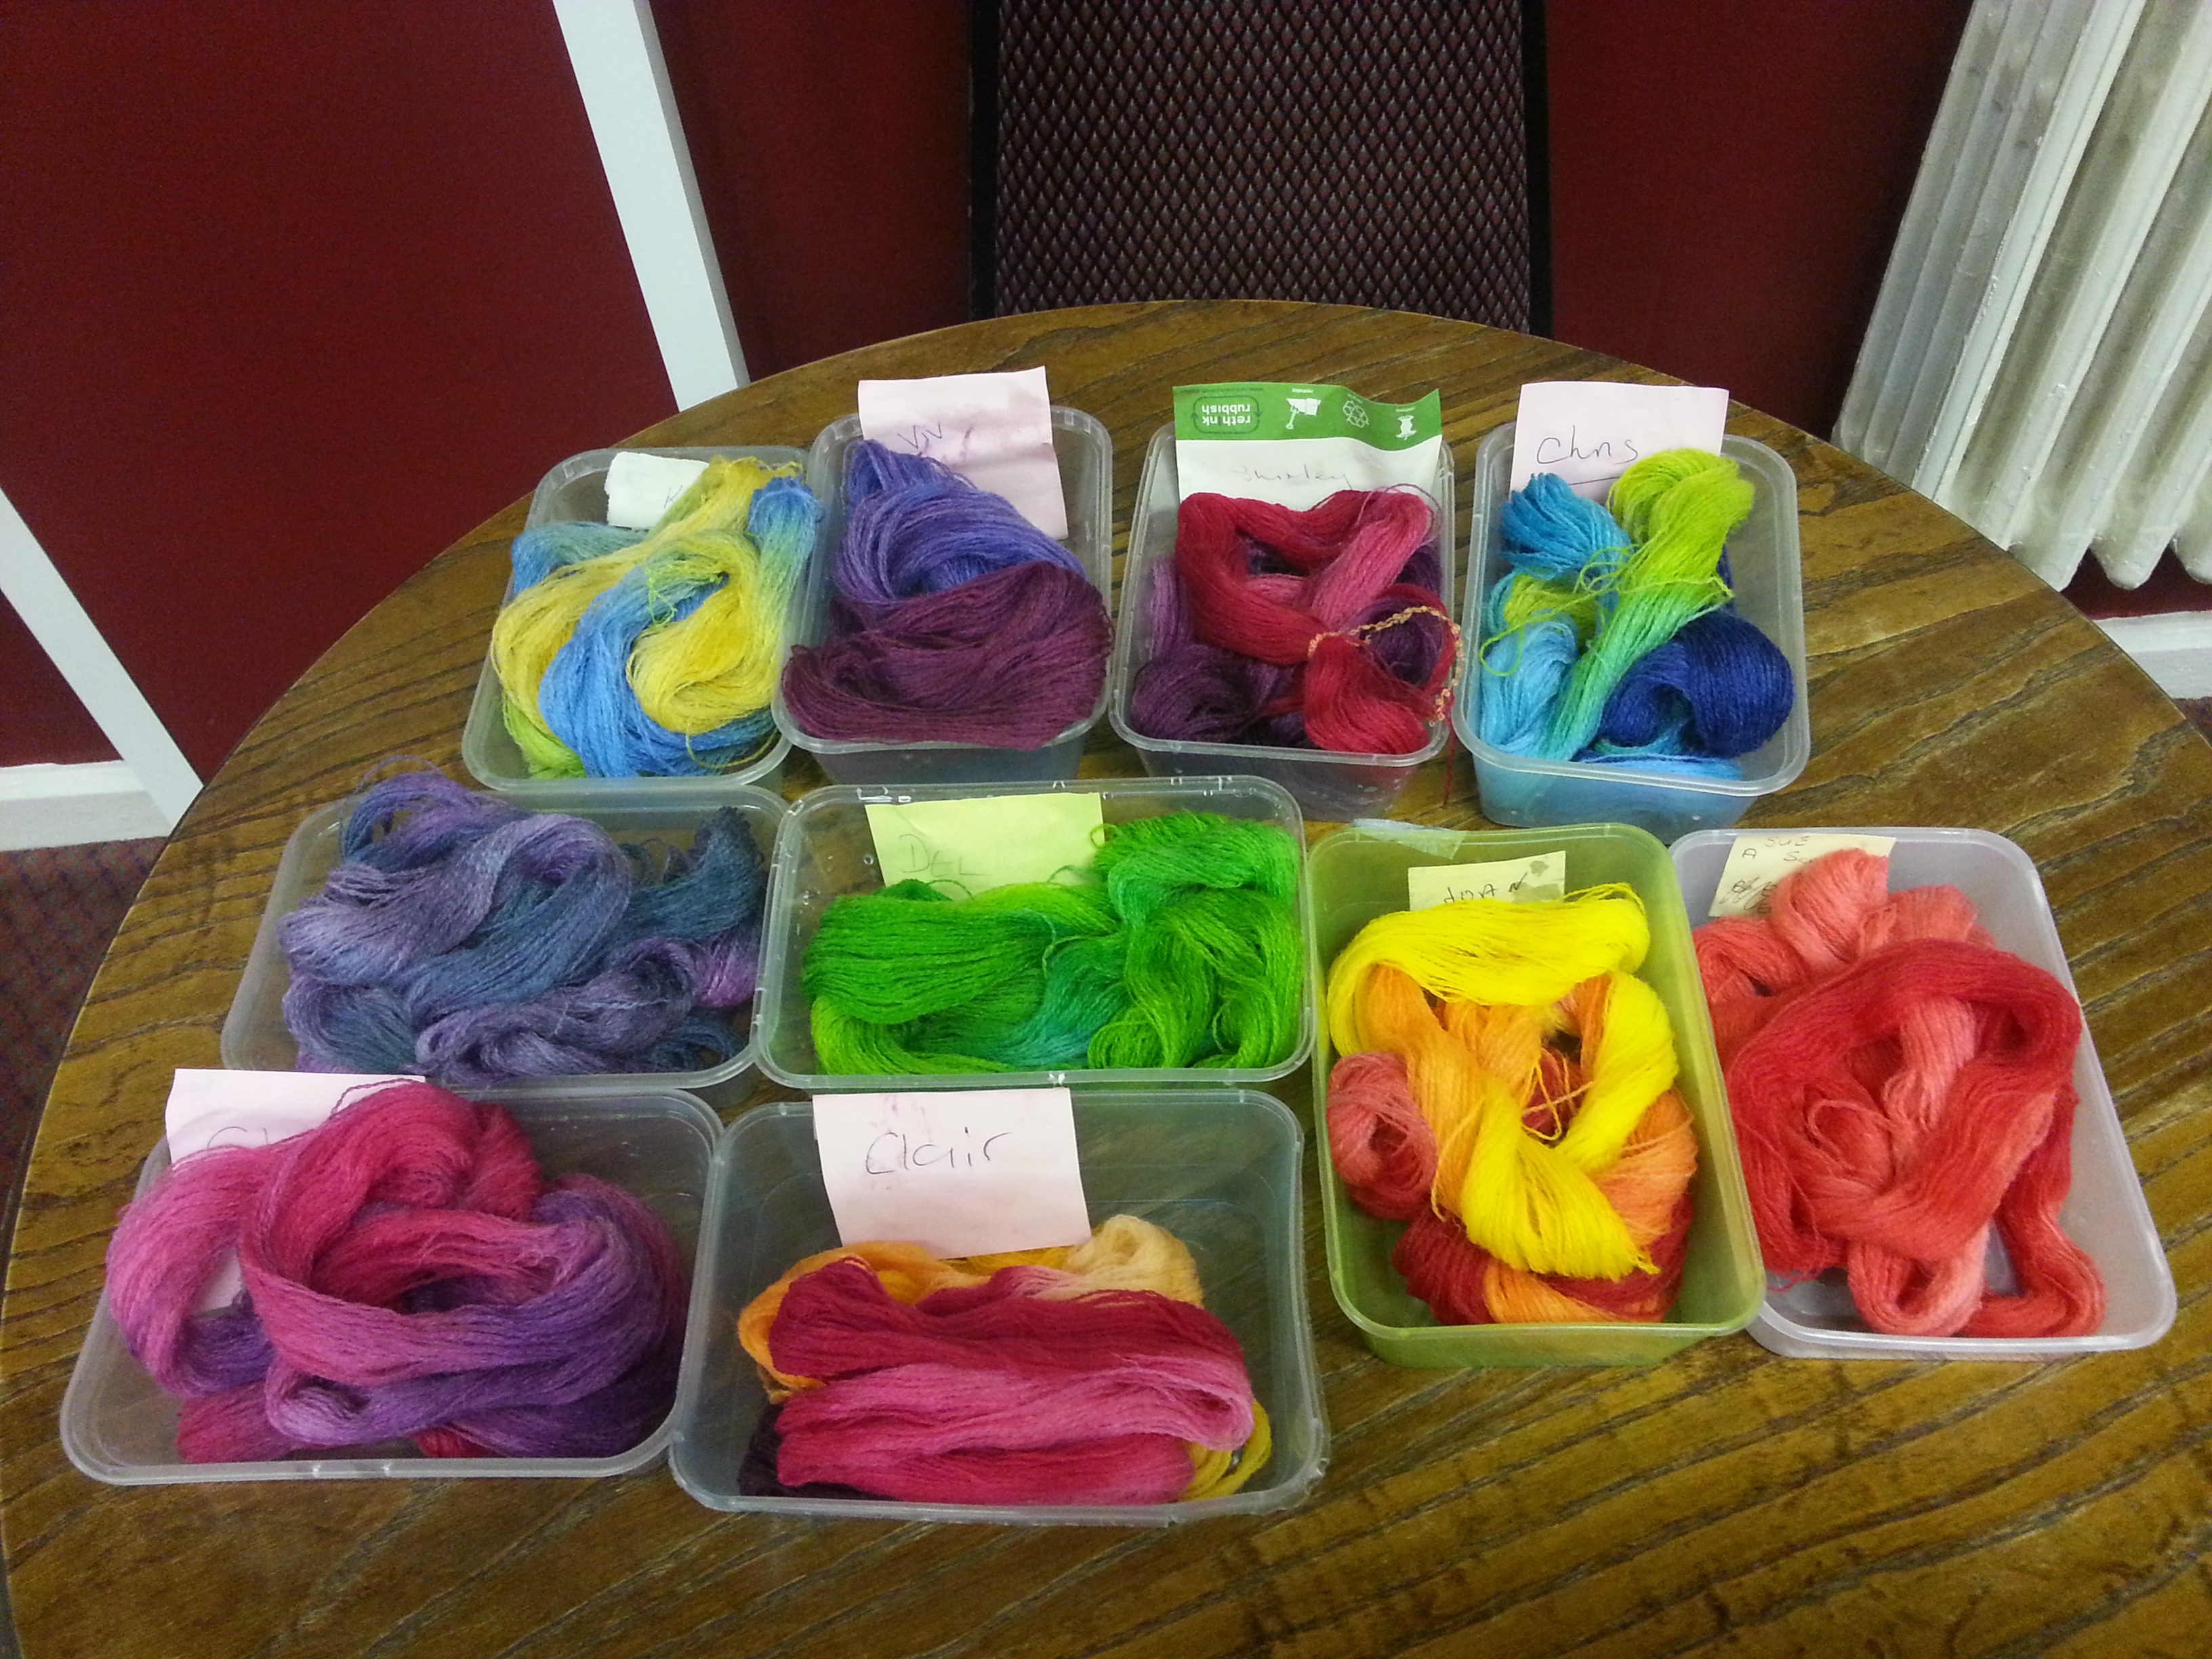 Introduction to dyeing with procion dyes with Debbie Tomkies at Black Sheep Yarns